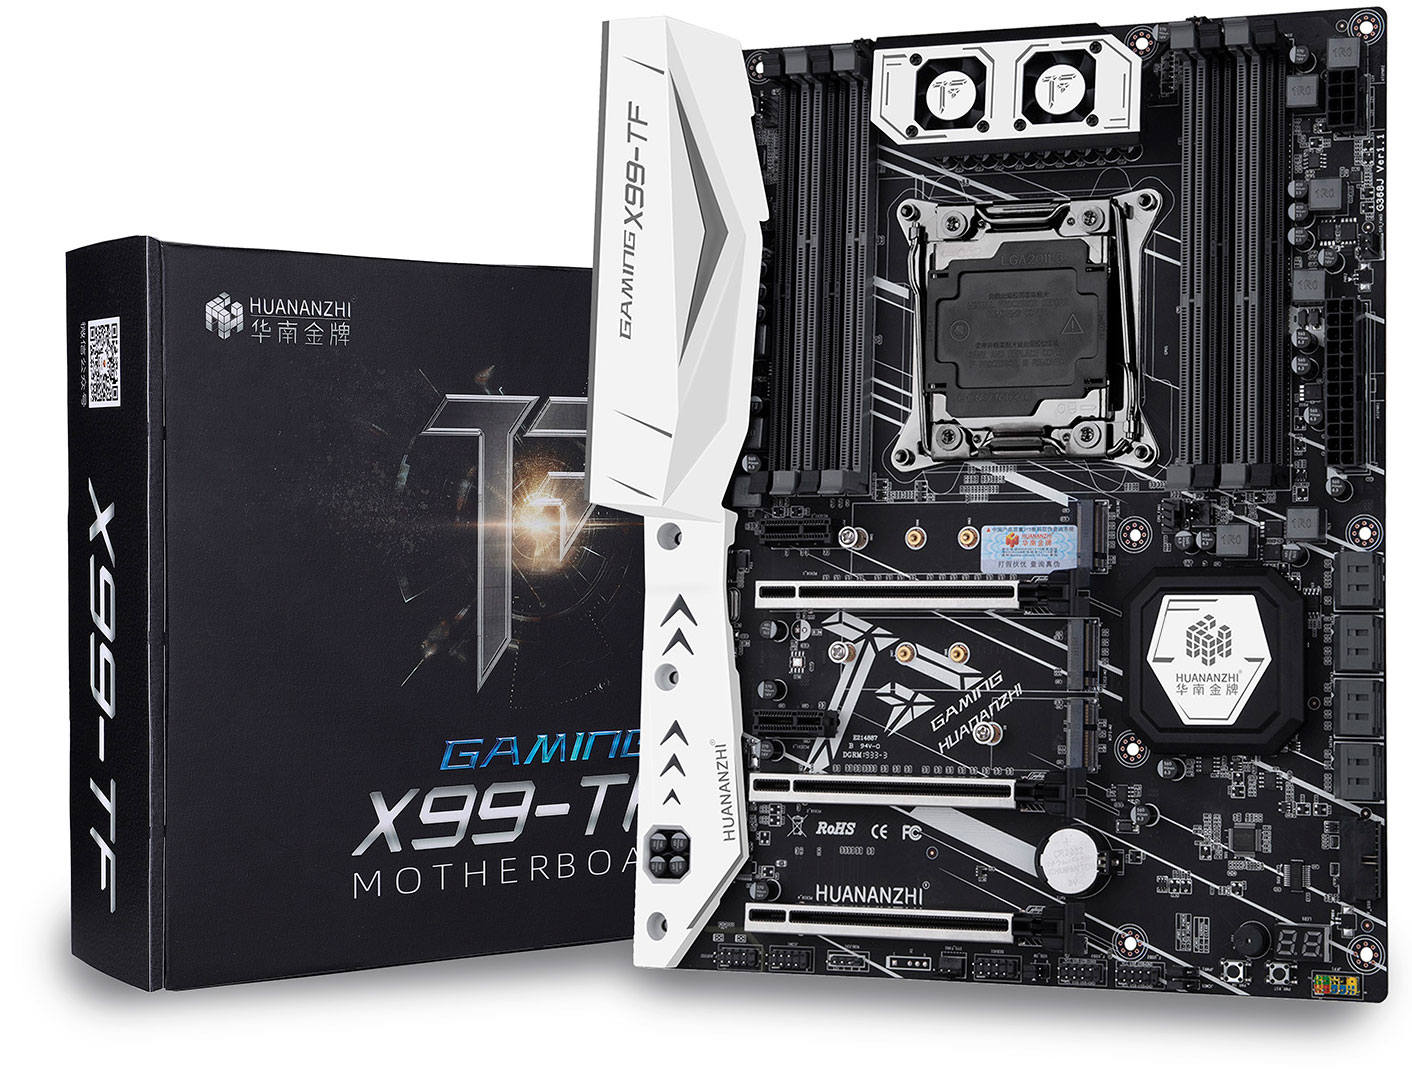 X99 motherboard - with DDR3? - CPUs, Motherboards, and Memory - Linus